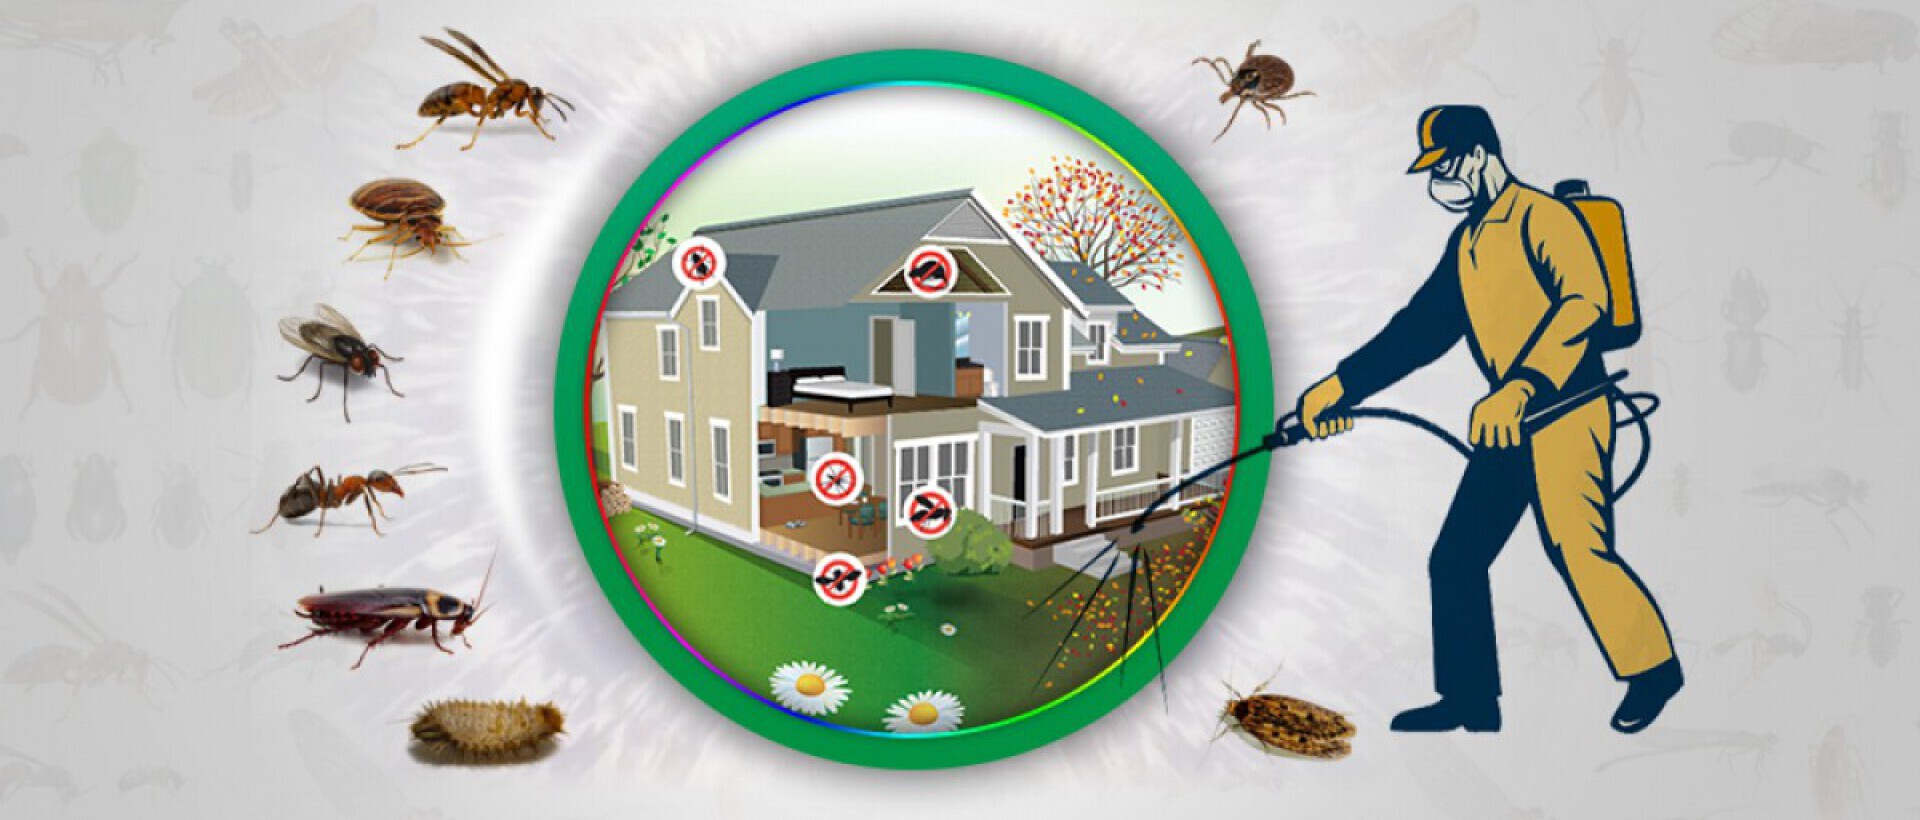 What types of pests do your pest control services cover